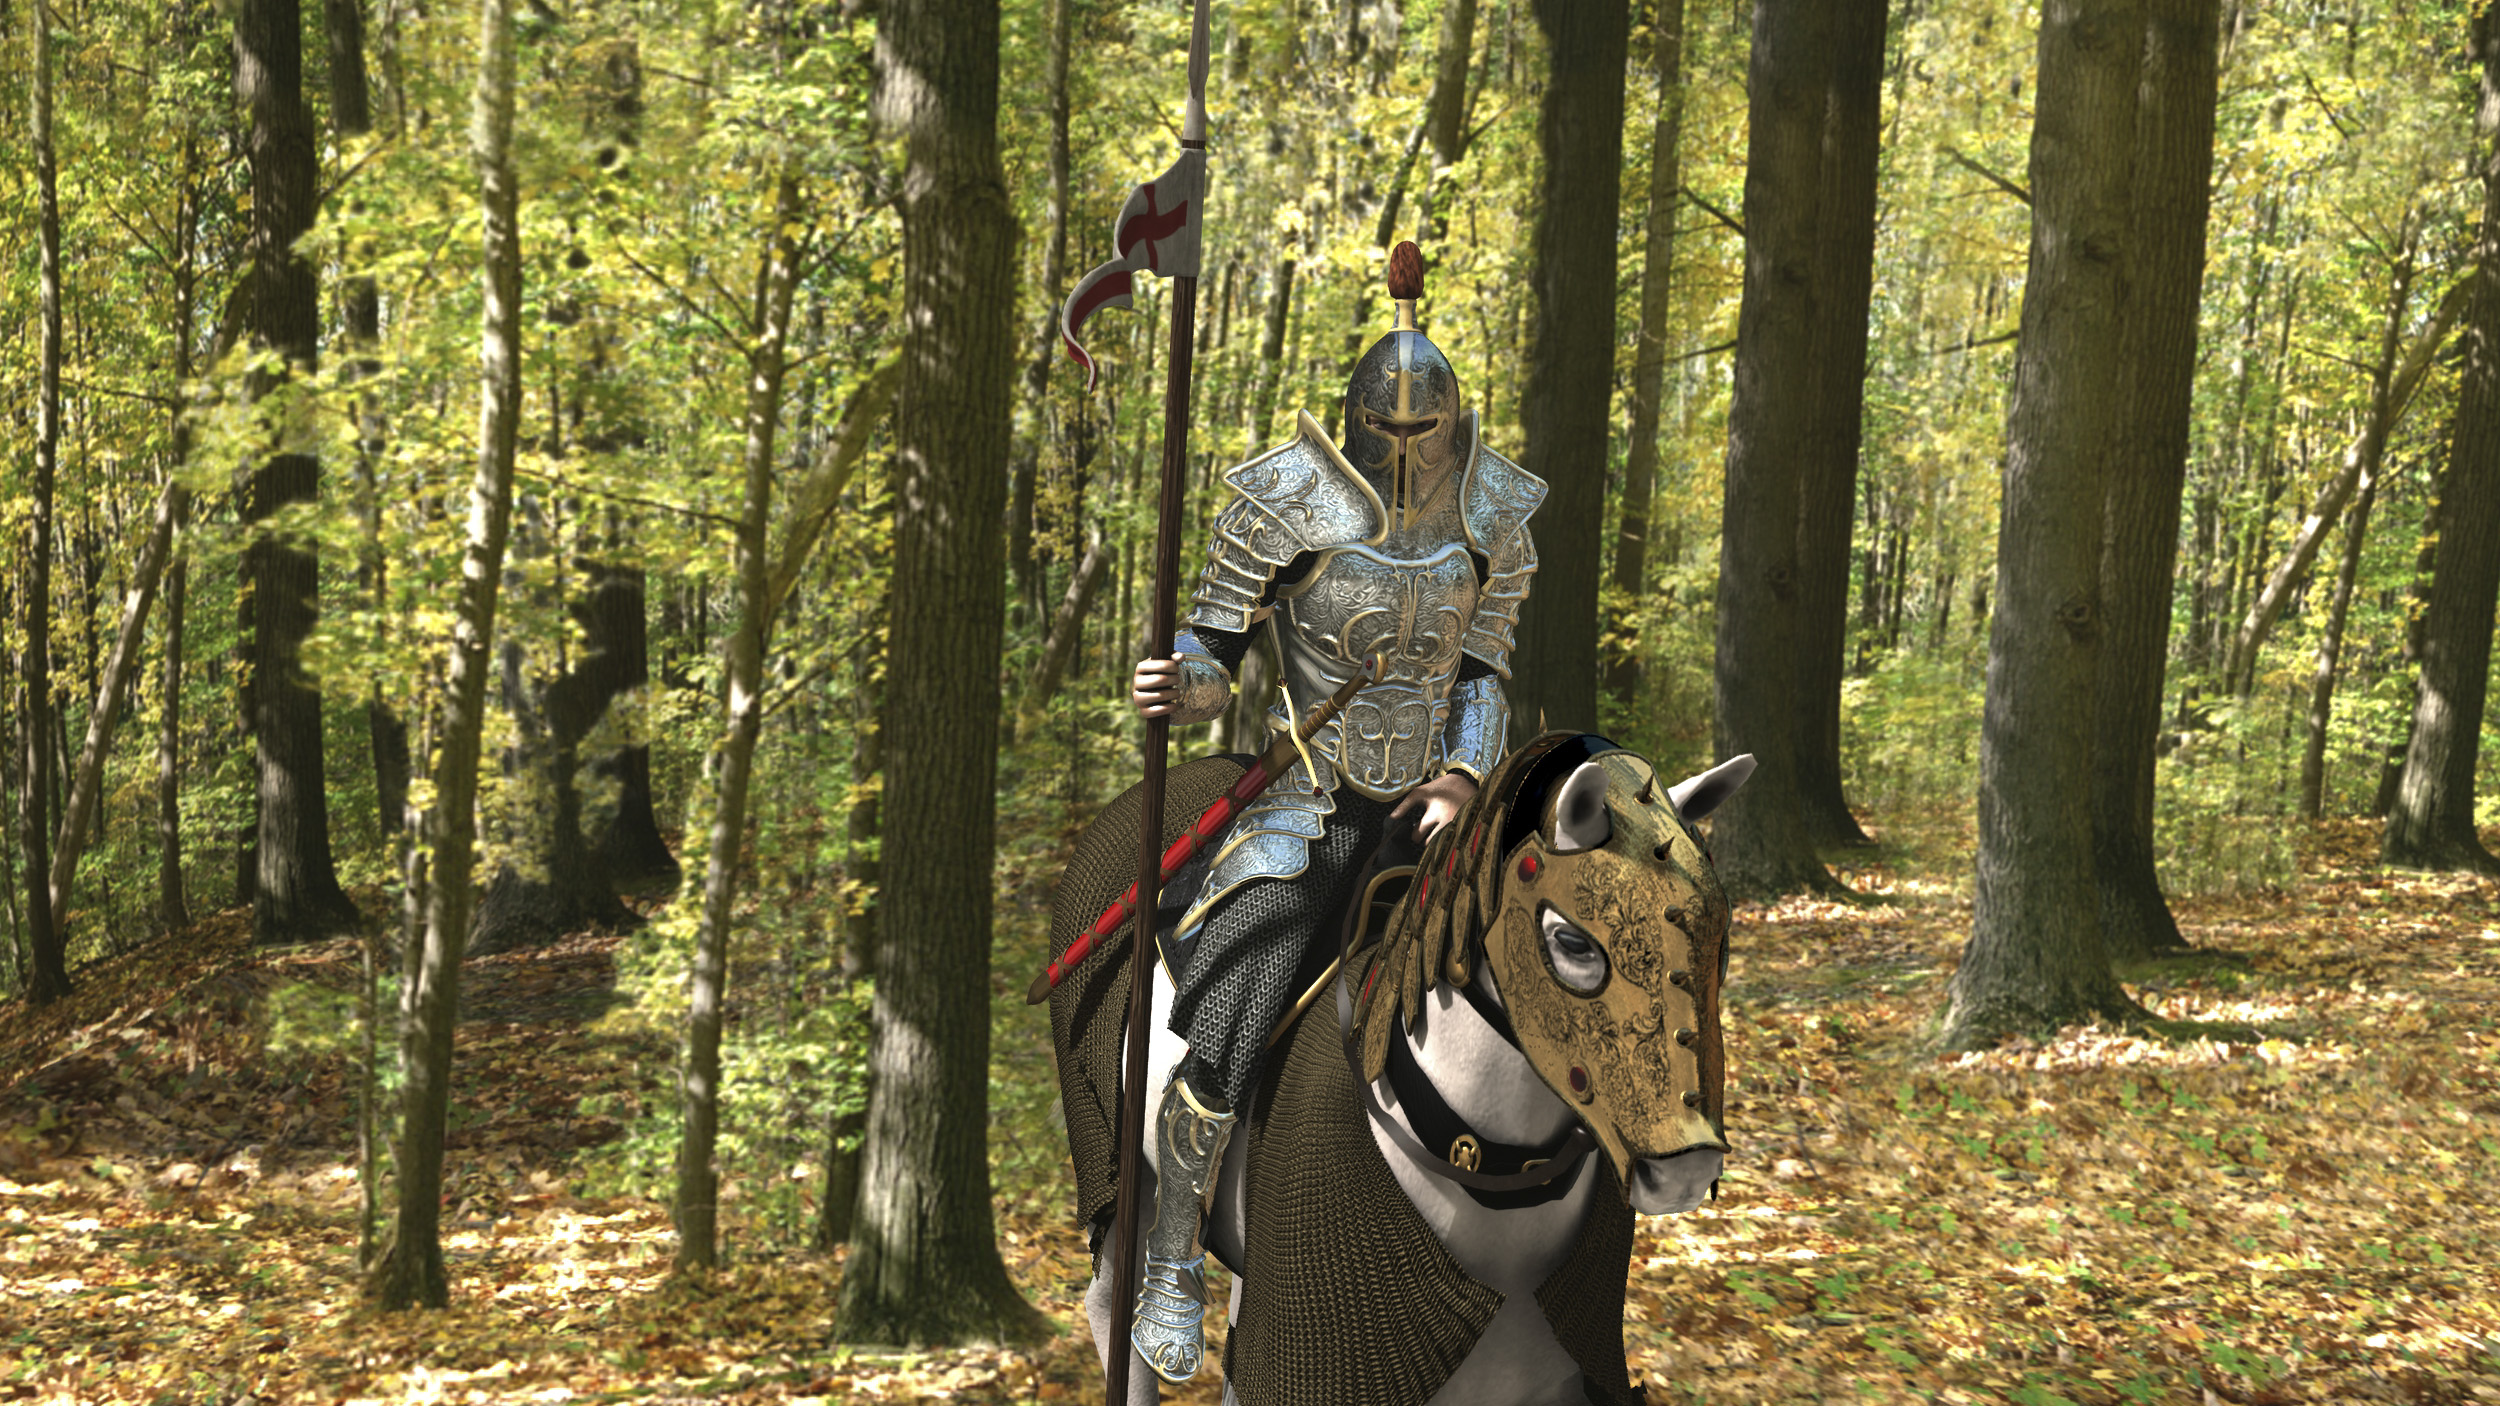 Low Res Knight & Horse.jpg